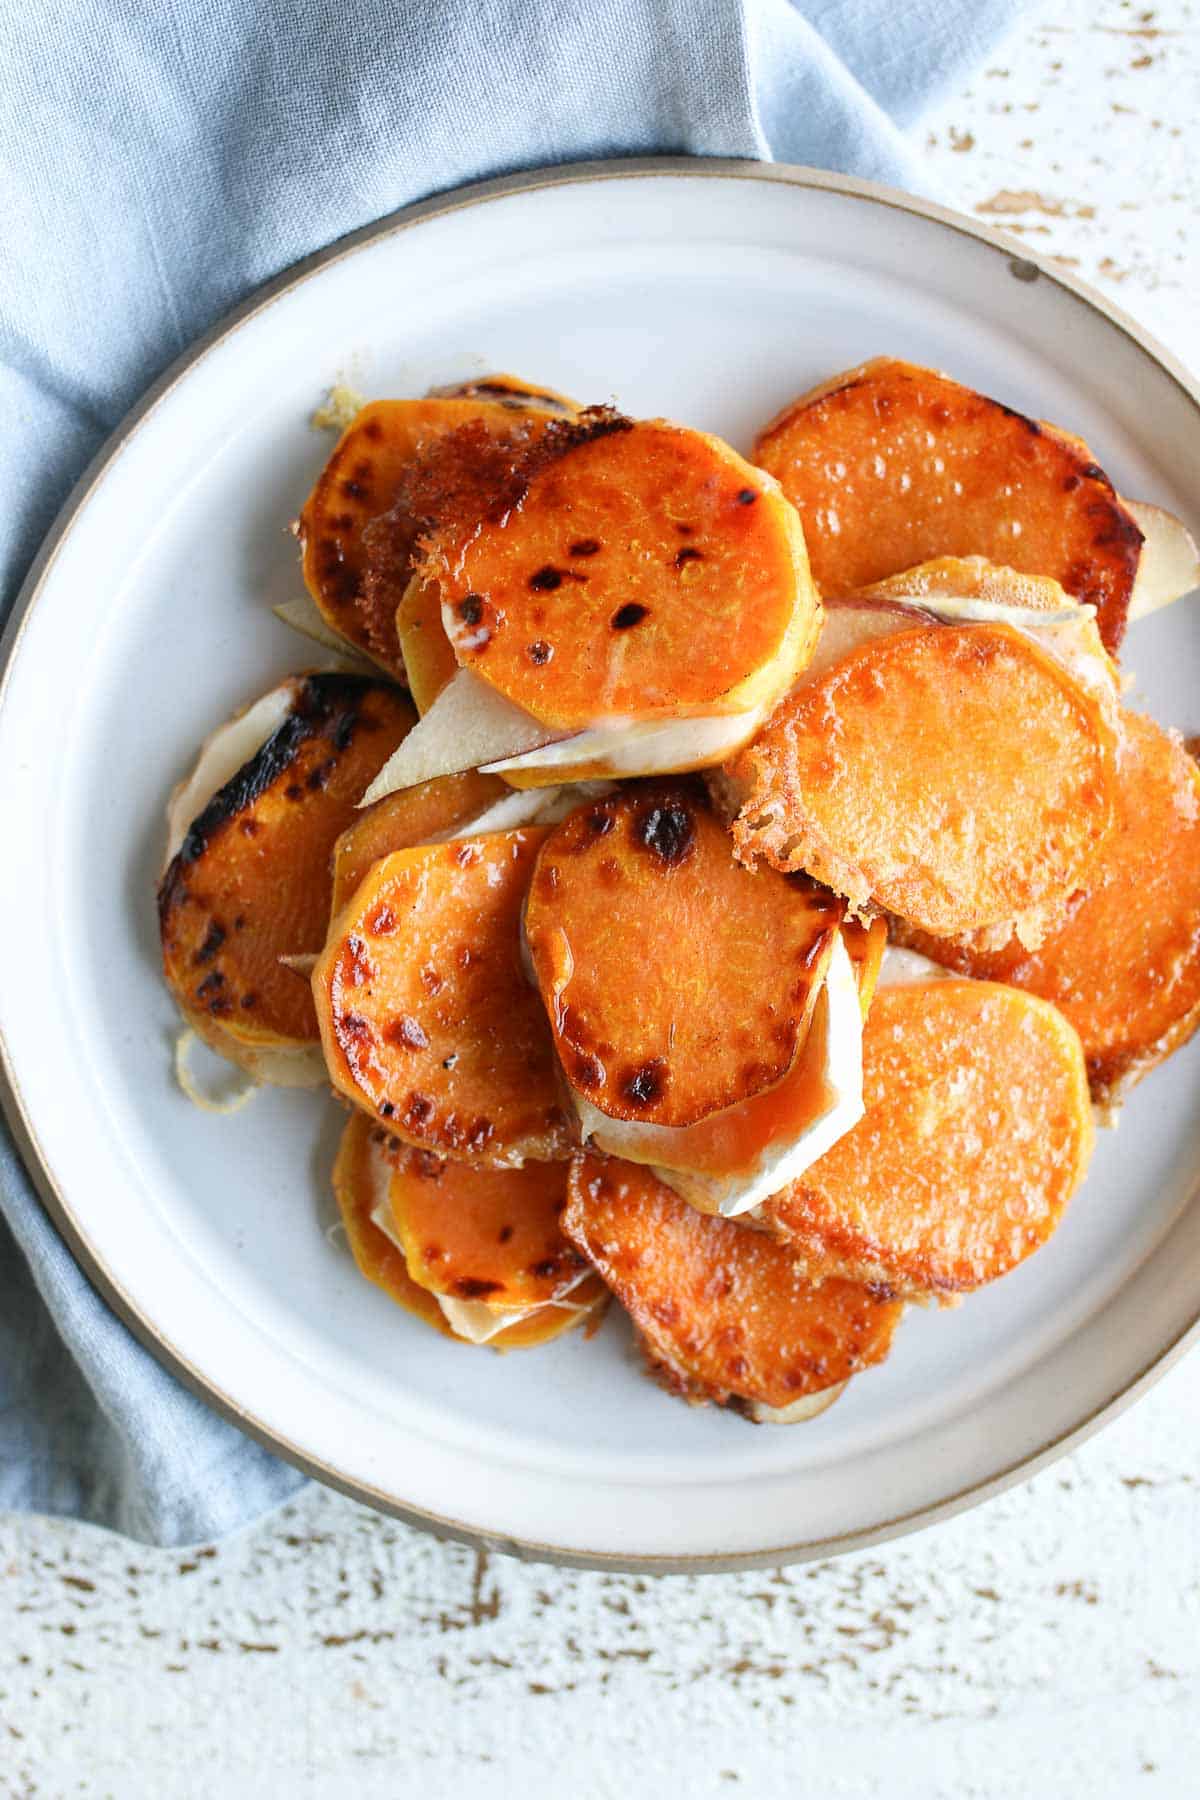 Overheat image of a plate with multiple sweet potatoes grilled cheese bites on a white plate.